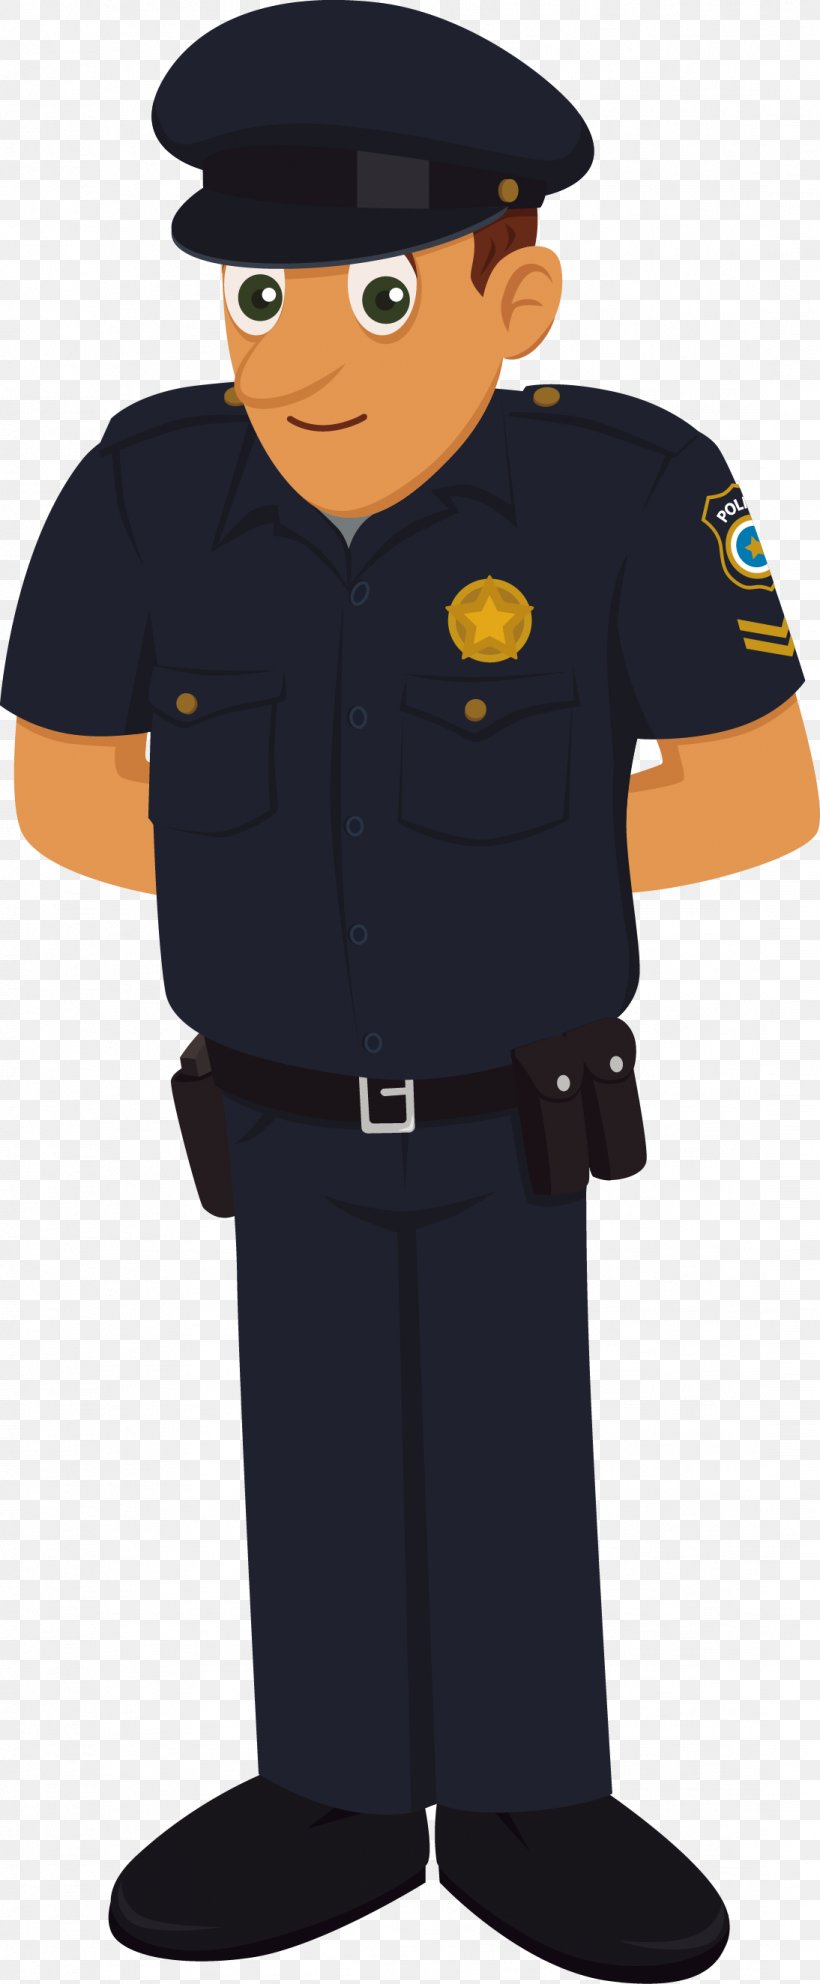 Police Officer Police Uniforms Of The United States Clip Art, PNG, 1094x2648px, Police, Badge, Cartoon, Gentleman, Male Download Free